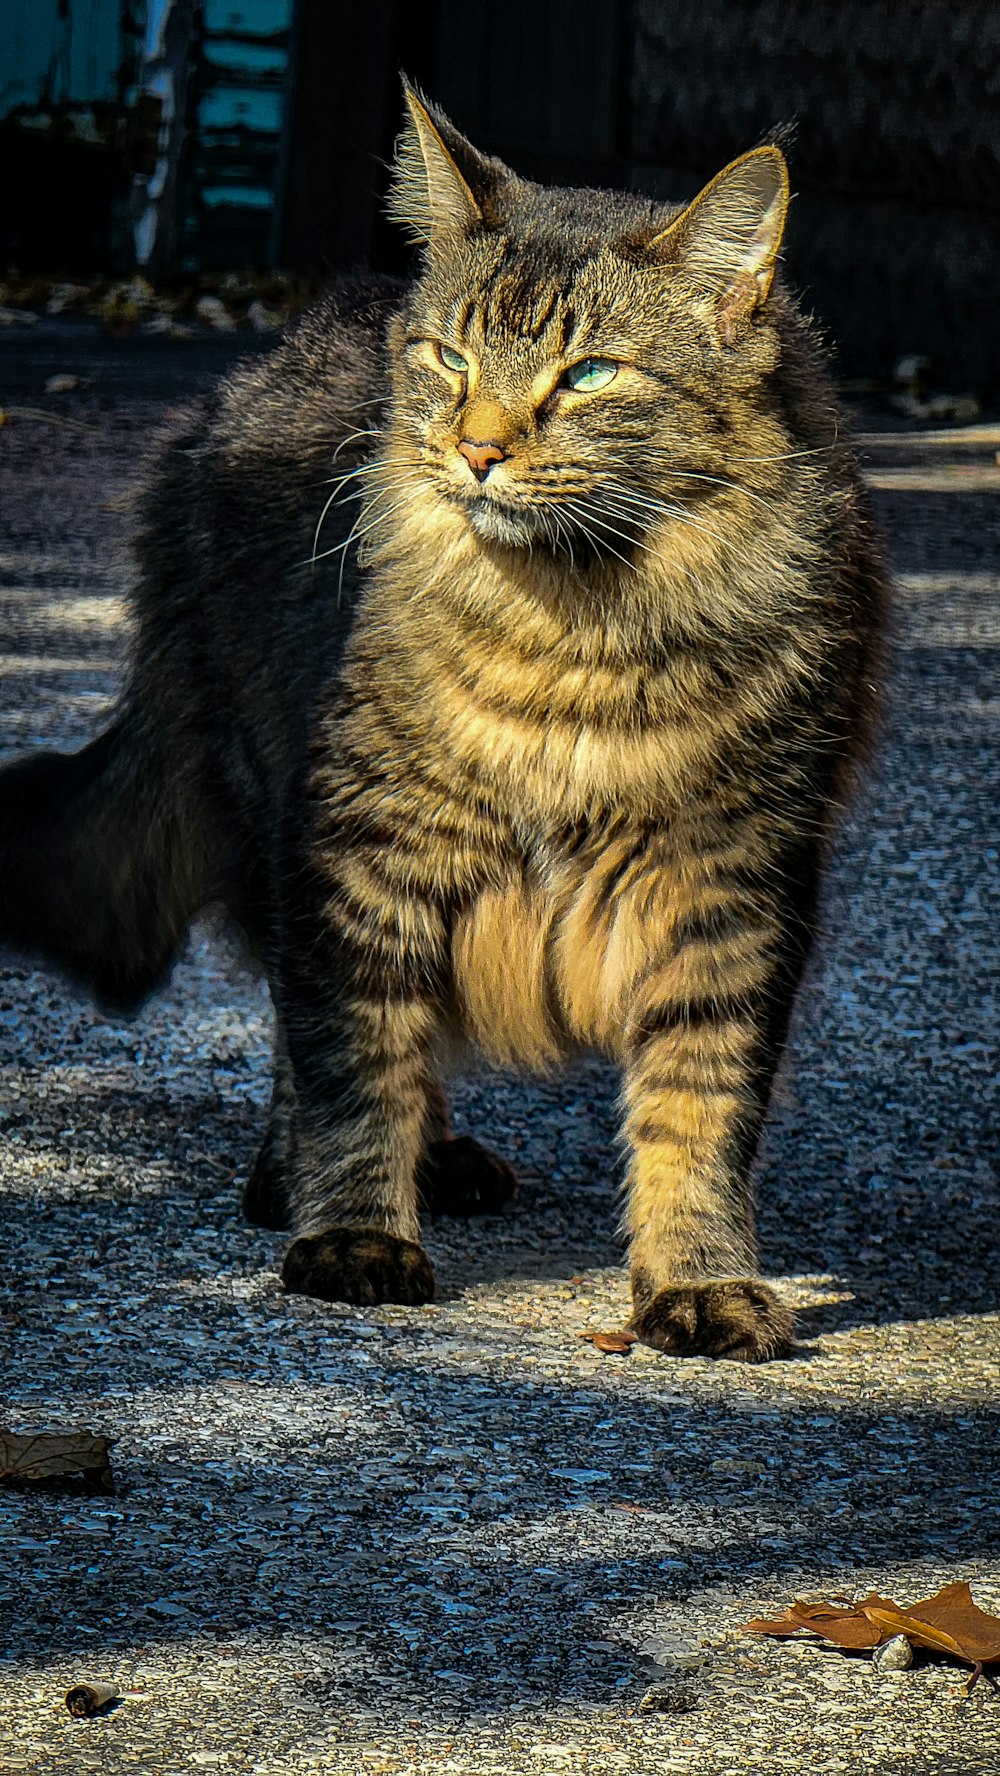 a cat walking across a gravel road next to a building